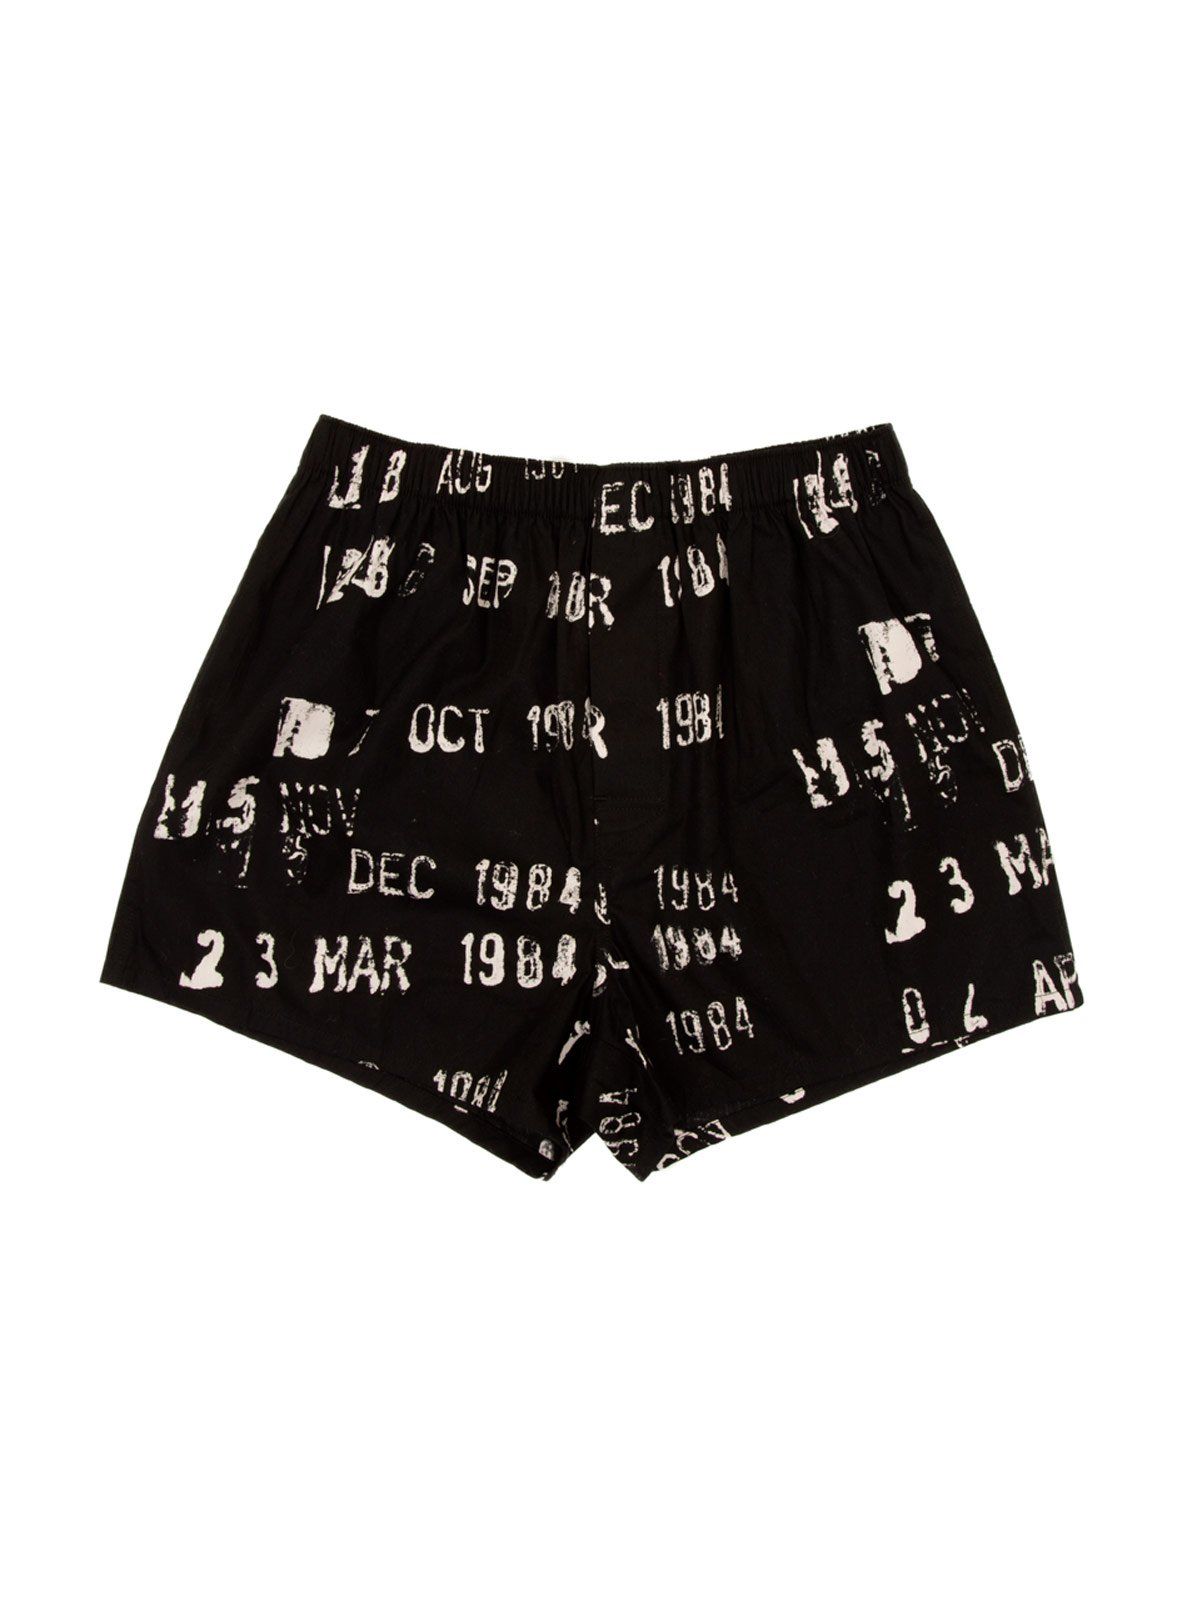 Black boxer shorts with a pattern of library stamp due dates